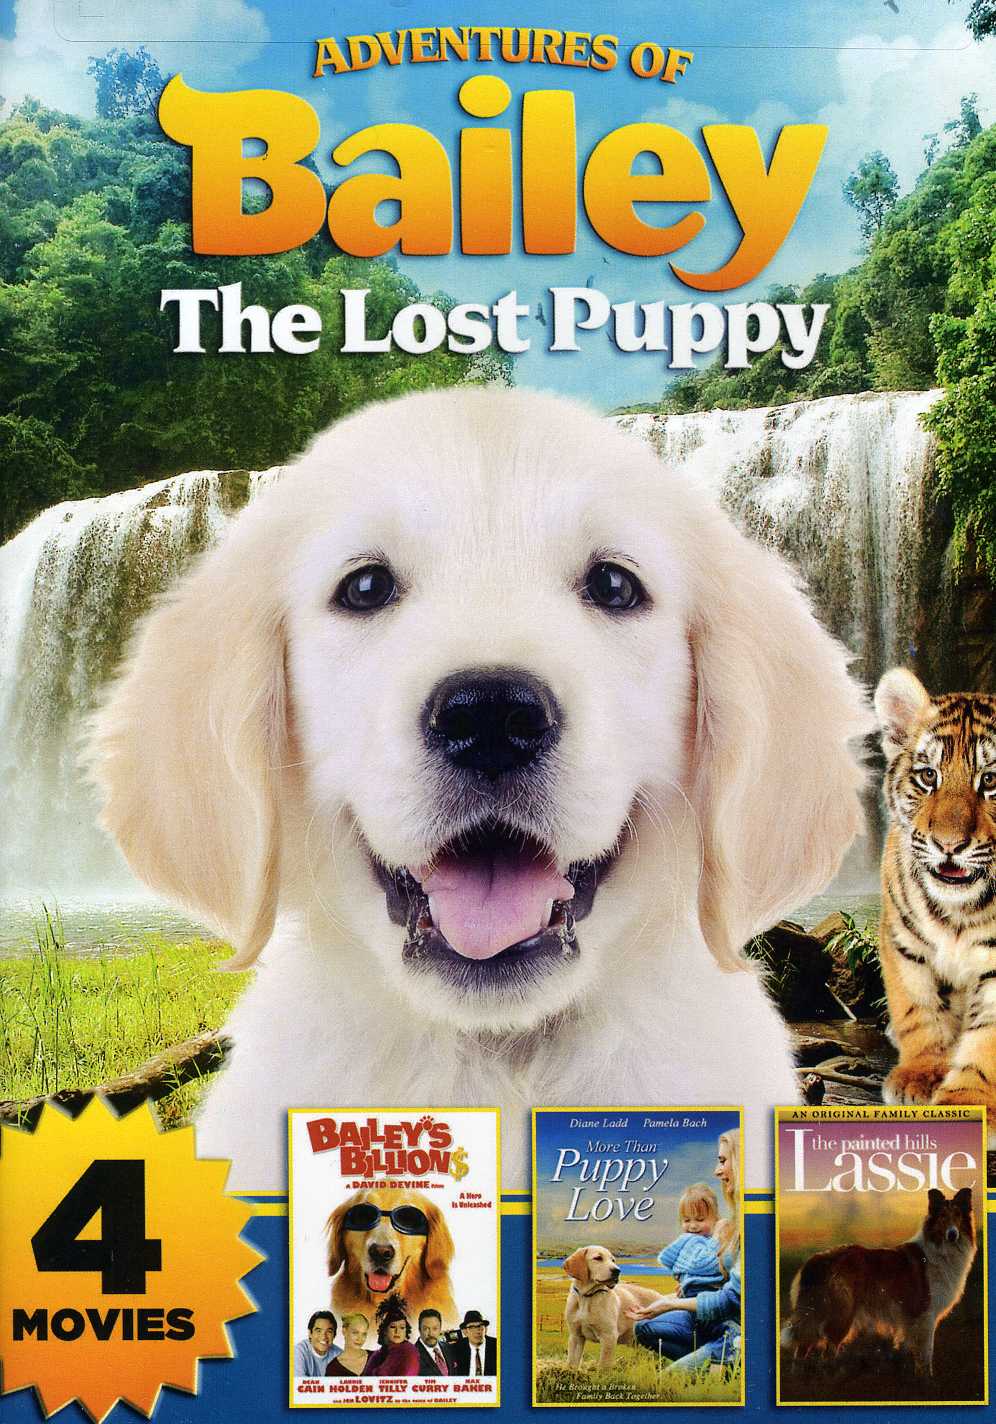 ADVENTURES OF BAILEY: THE LOST PUPPY